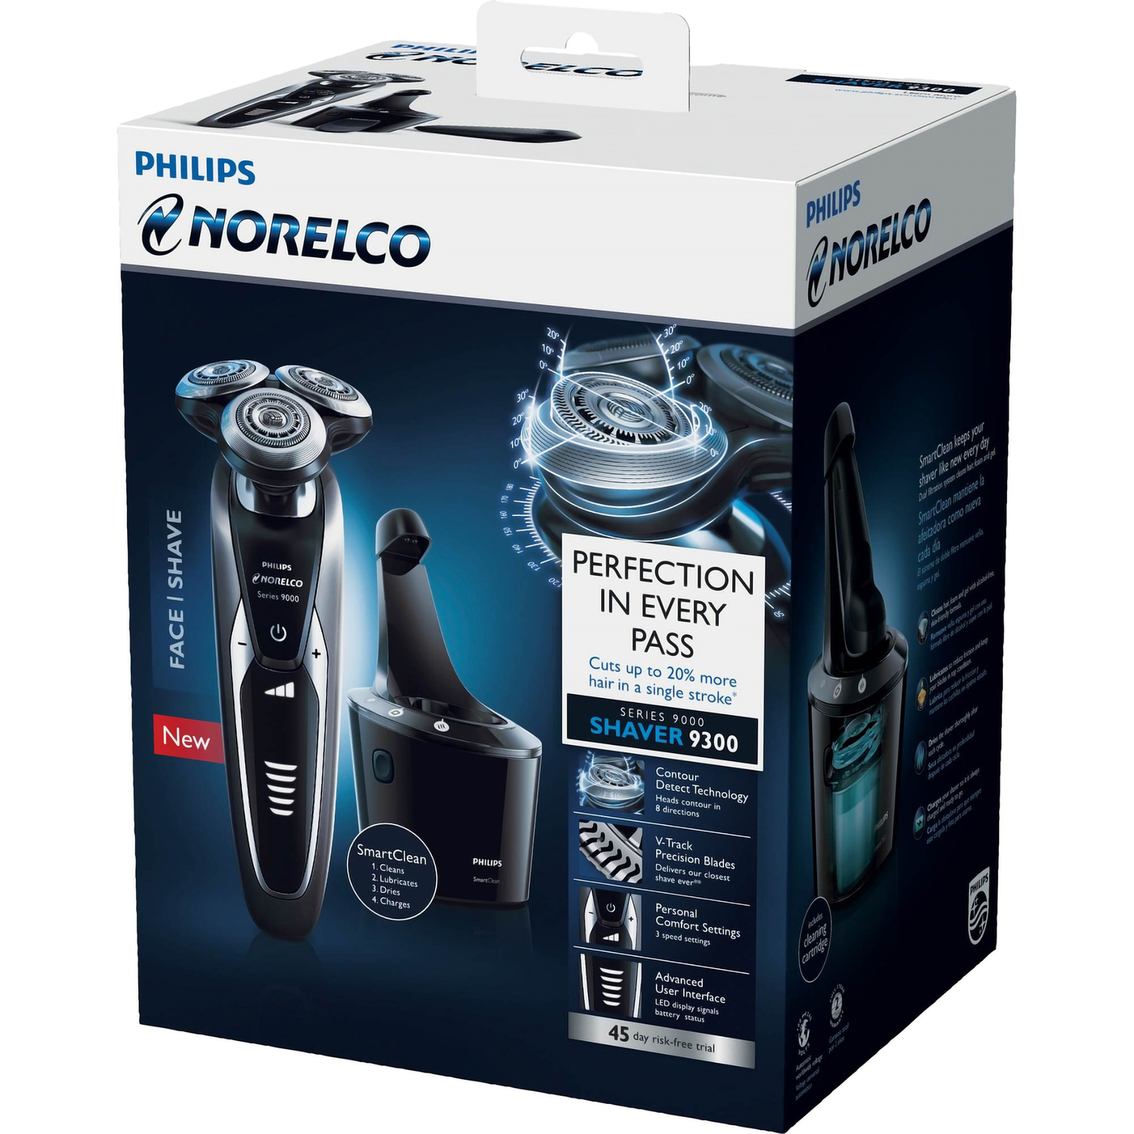 Philips Norelco 9300 Shaver - Image 3 of 3